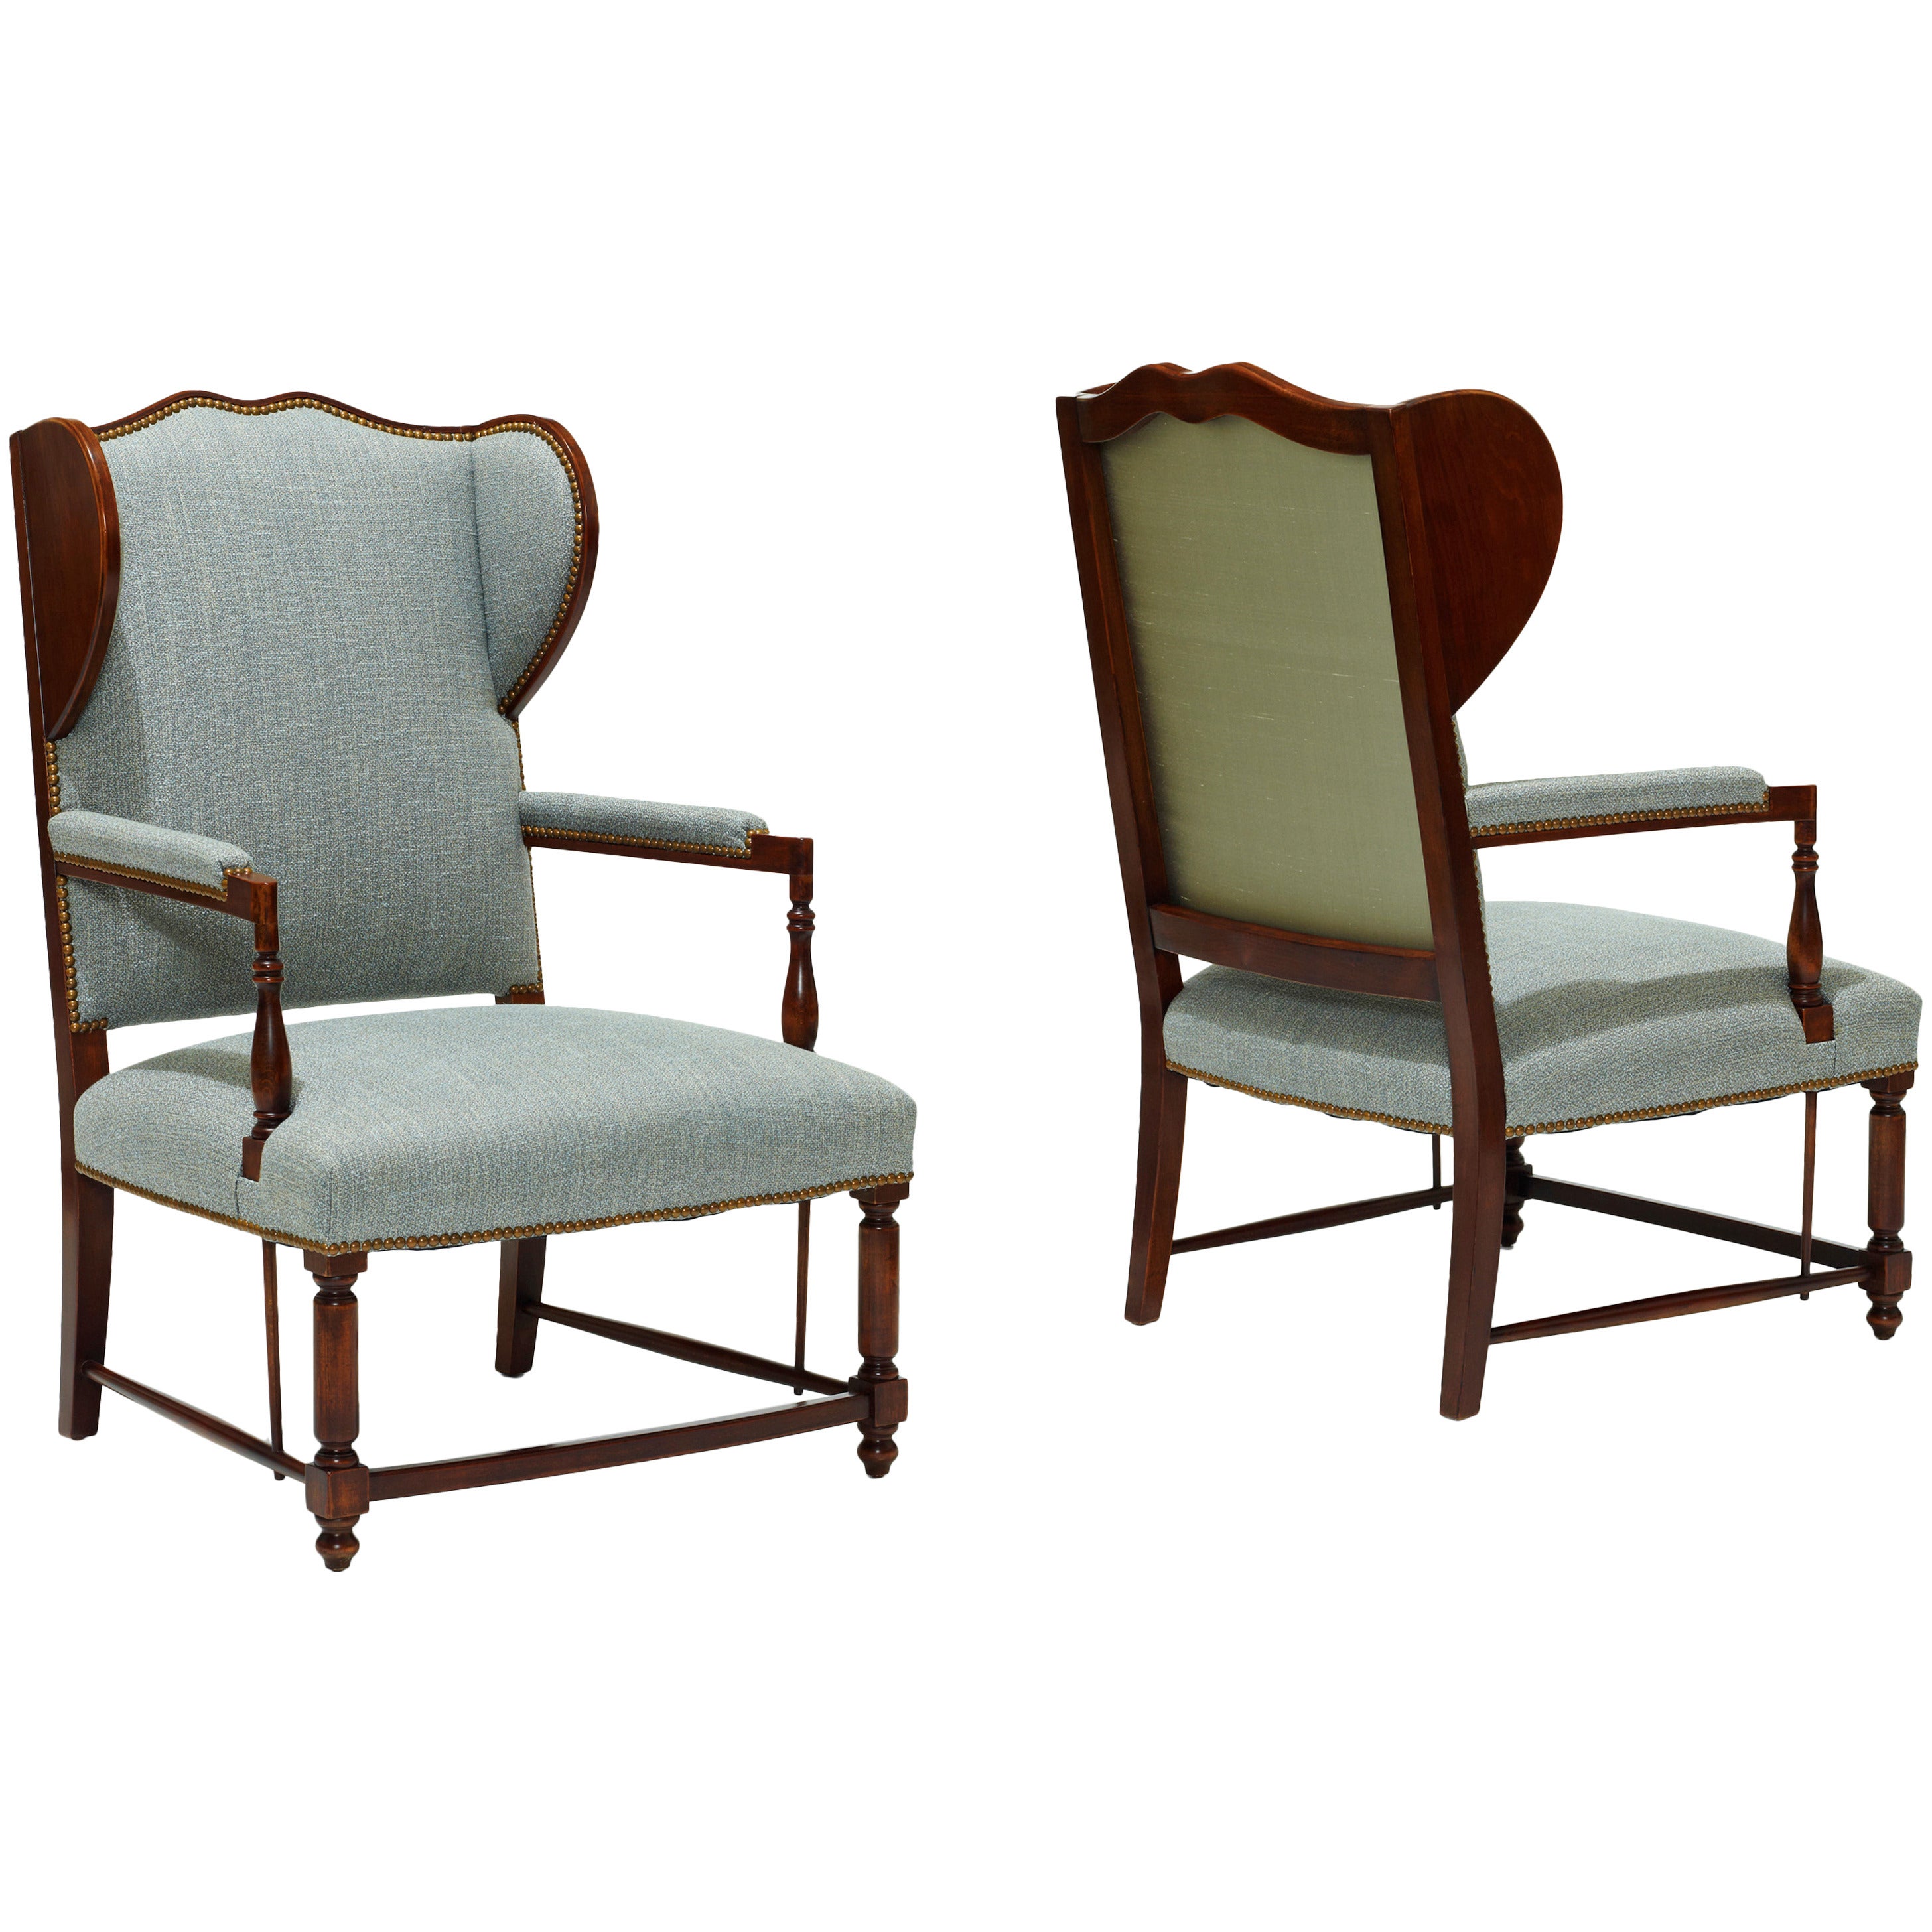 Pair of Swedish Wingback Chairs in Birch For Sale